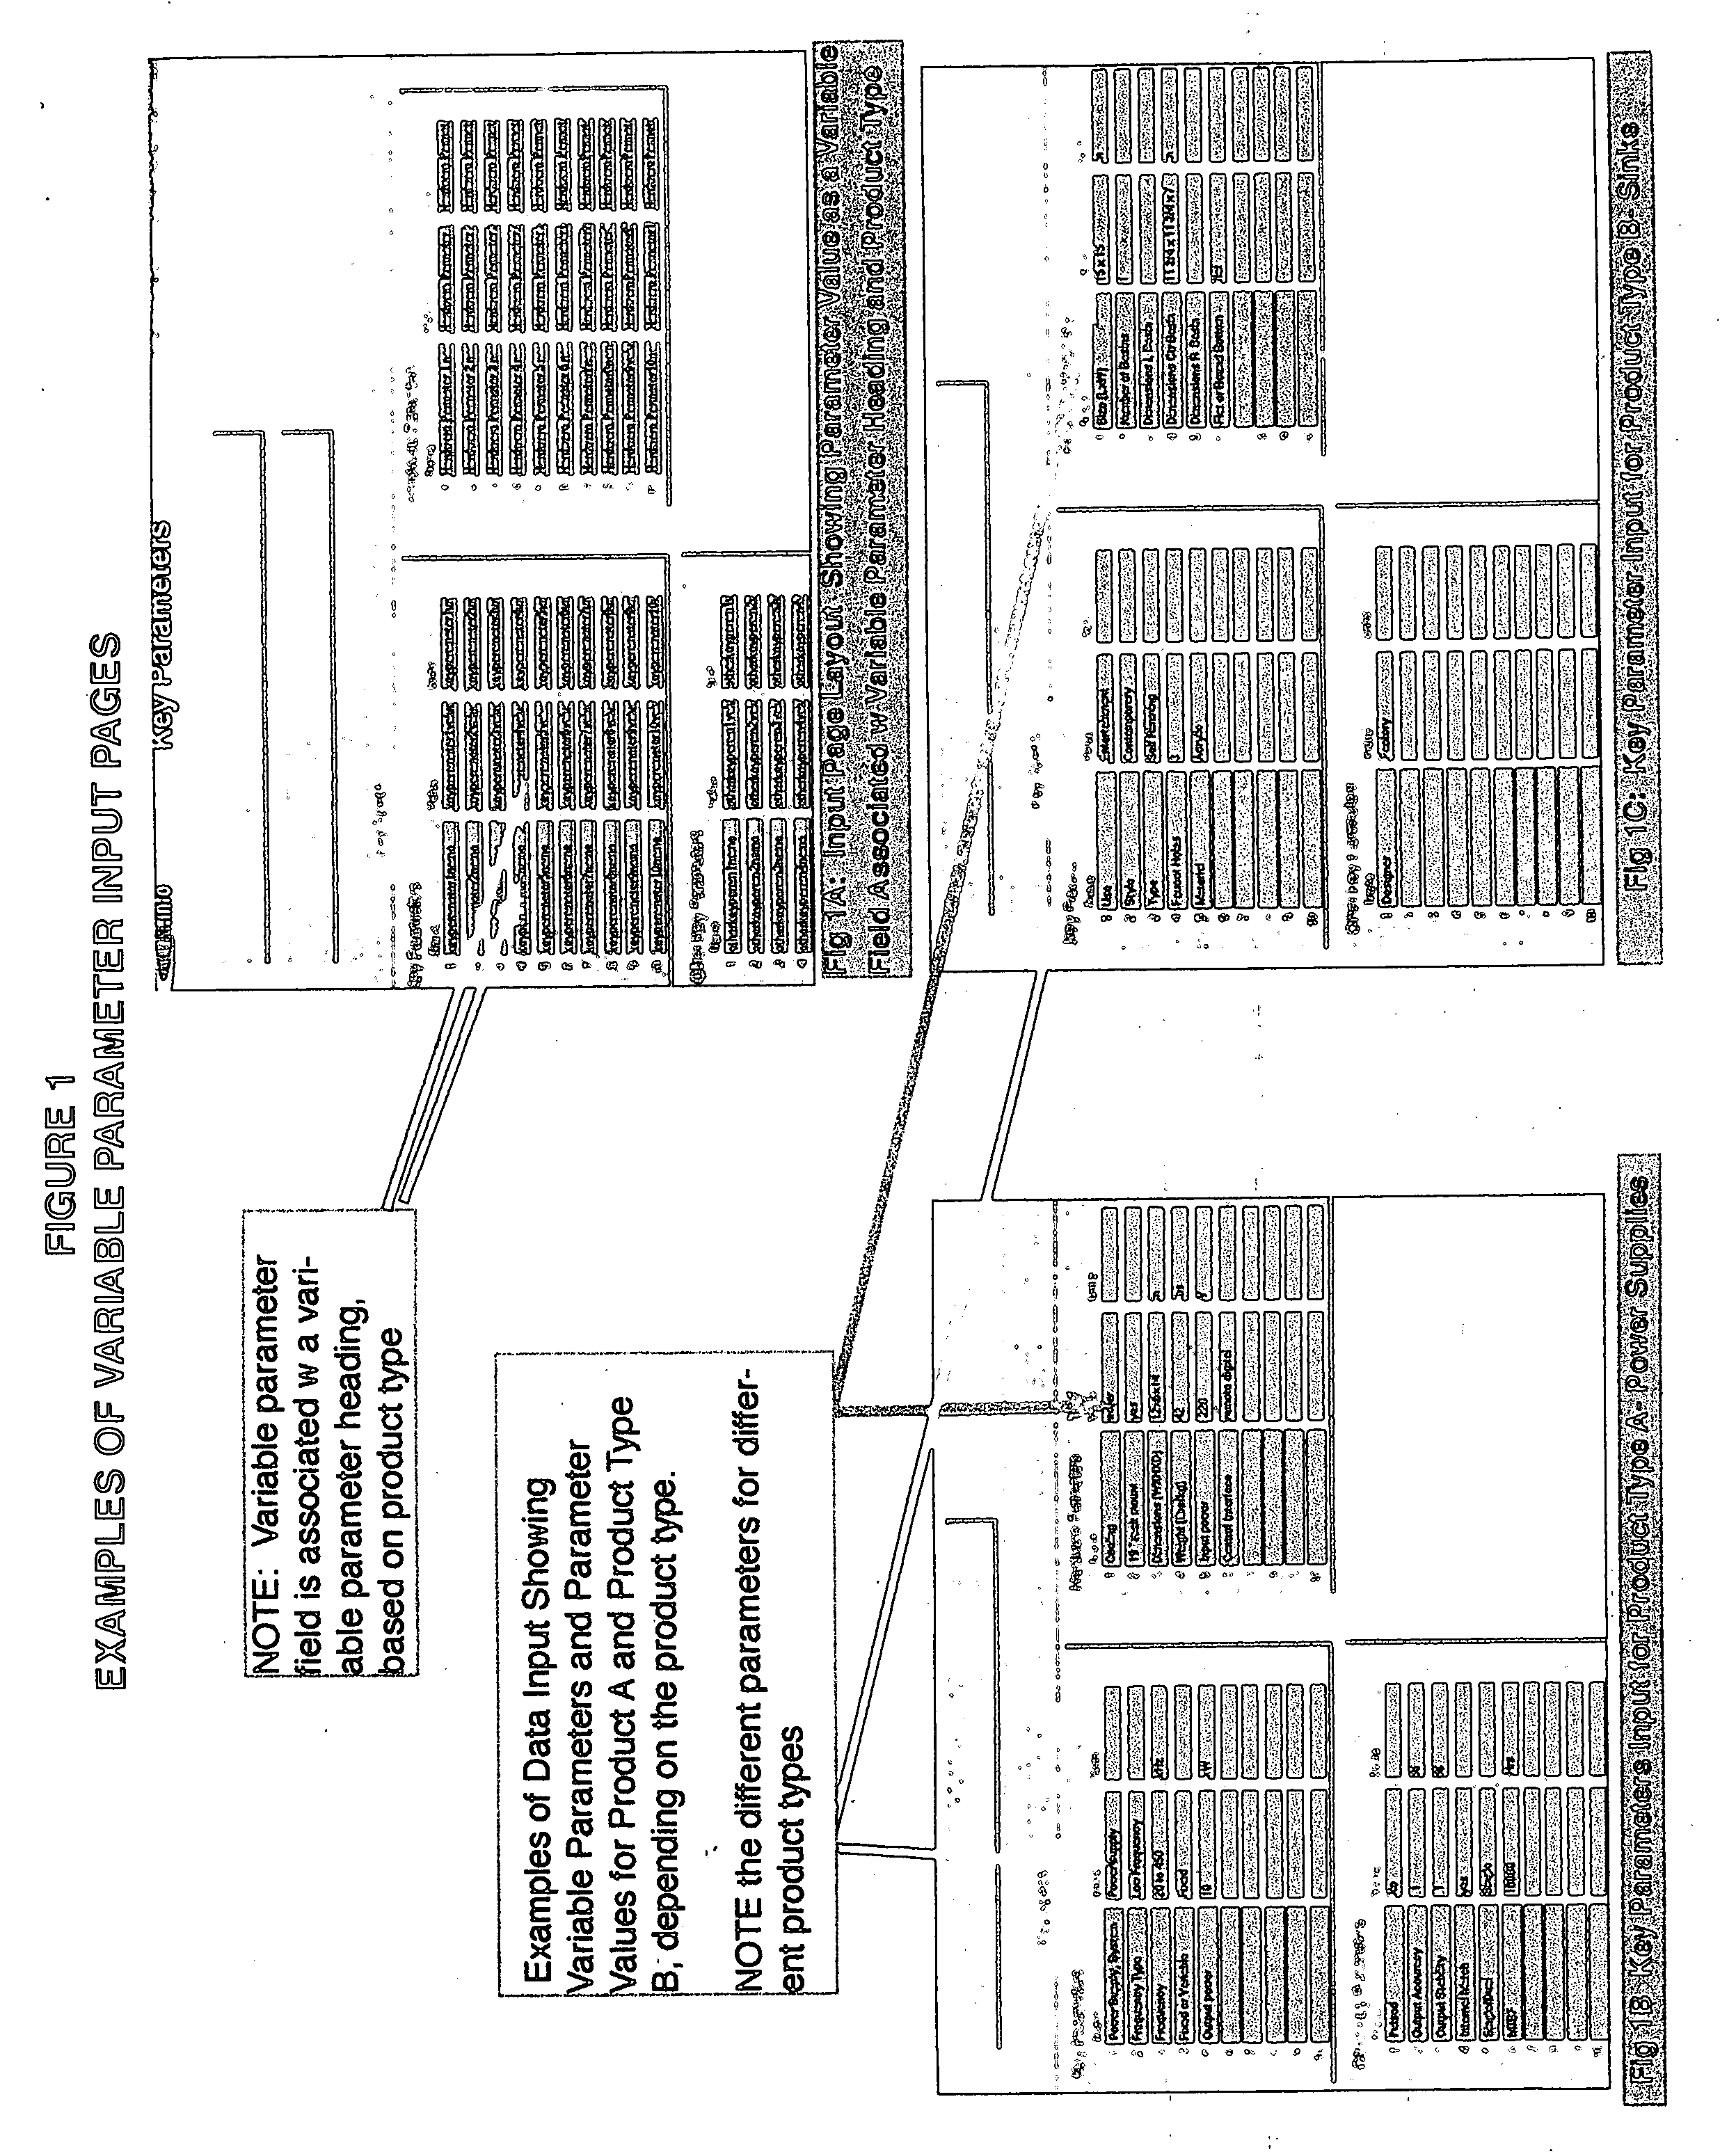 System and method for organization and display of data using identification of key data for comparison and analysis